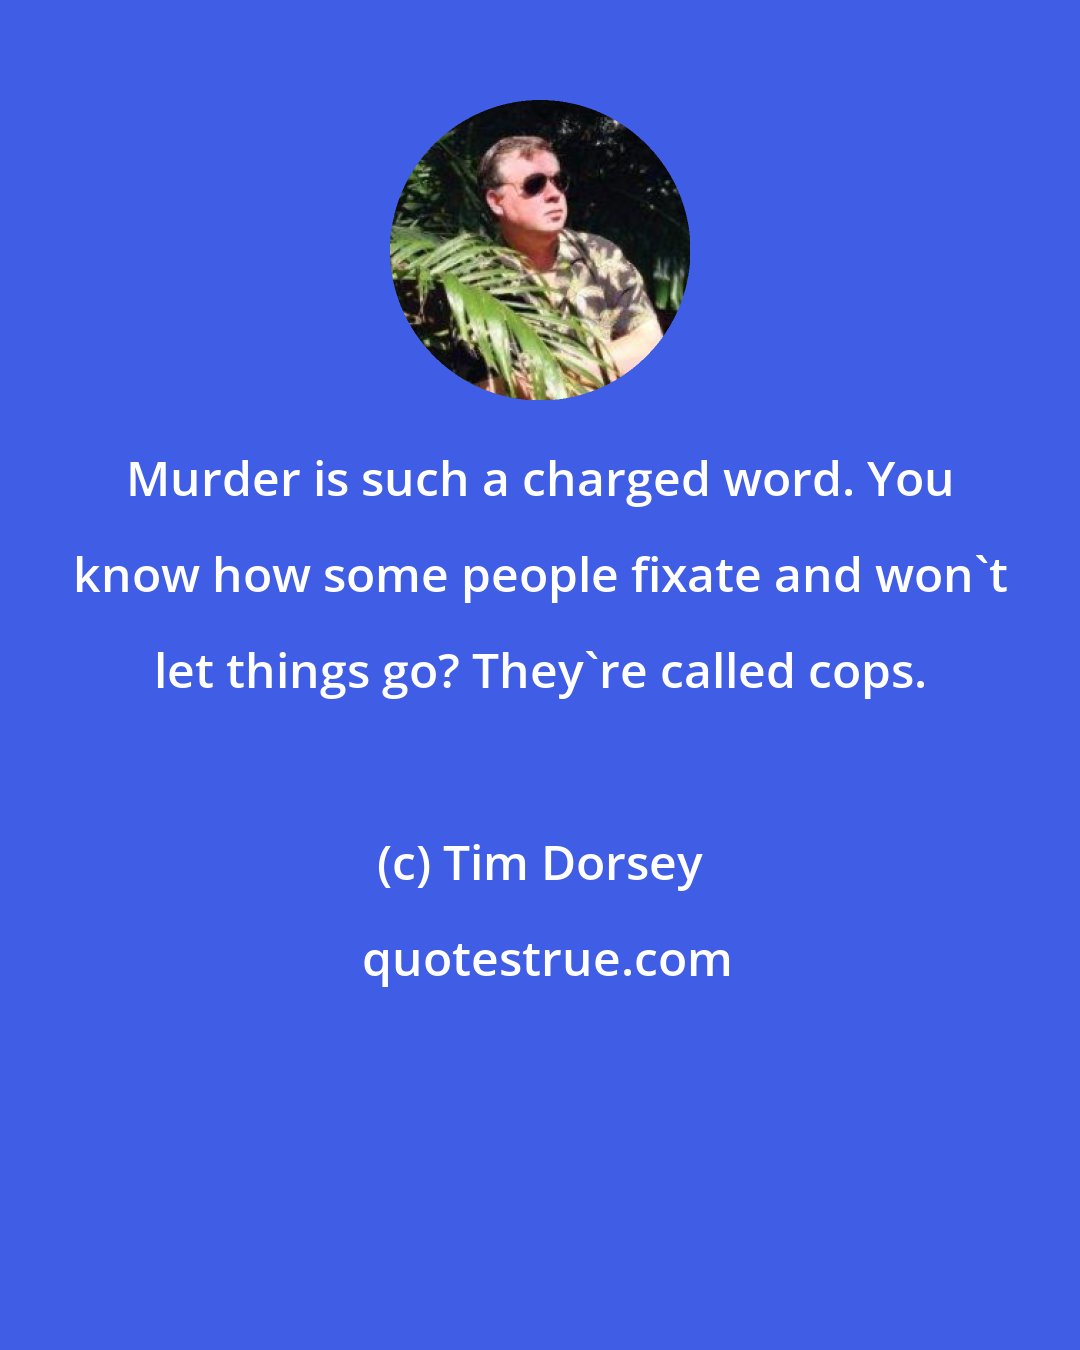 Tim Dorsey: Murder is such a charged word. You know how some people fixate and won't let things go? They're called cops.